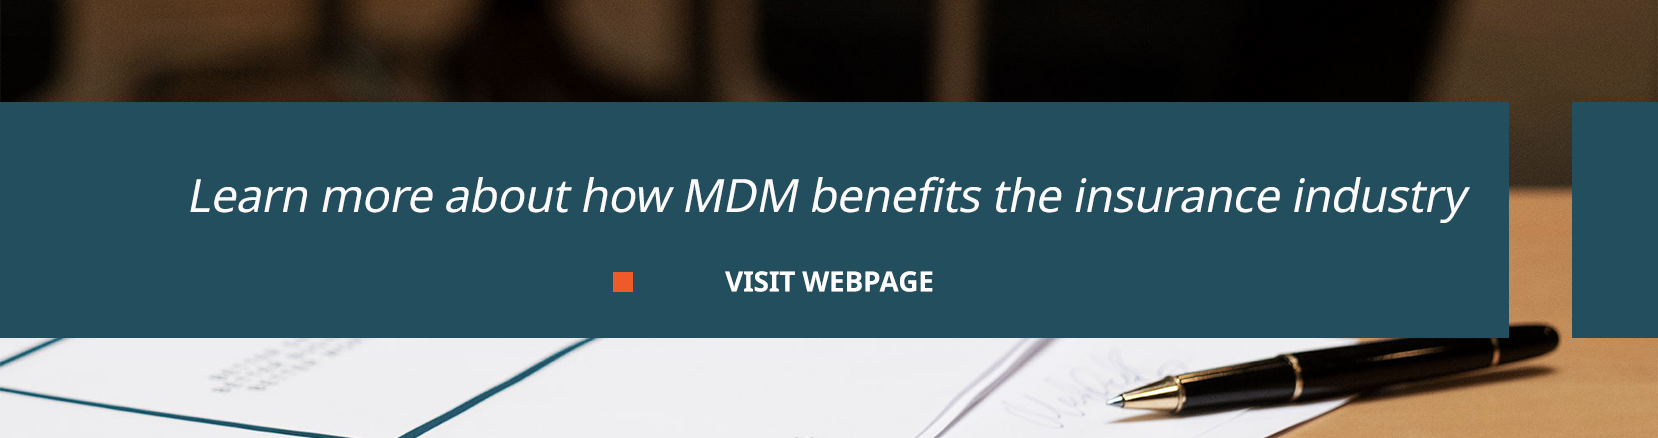 how mdm benefits the insurance industry